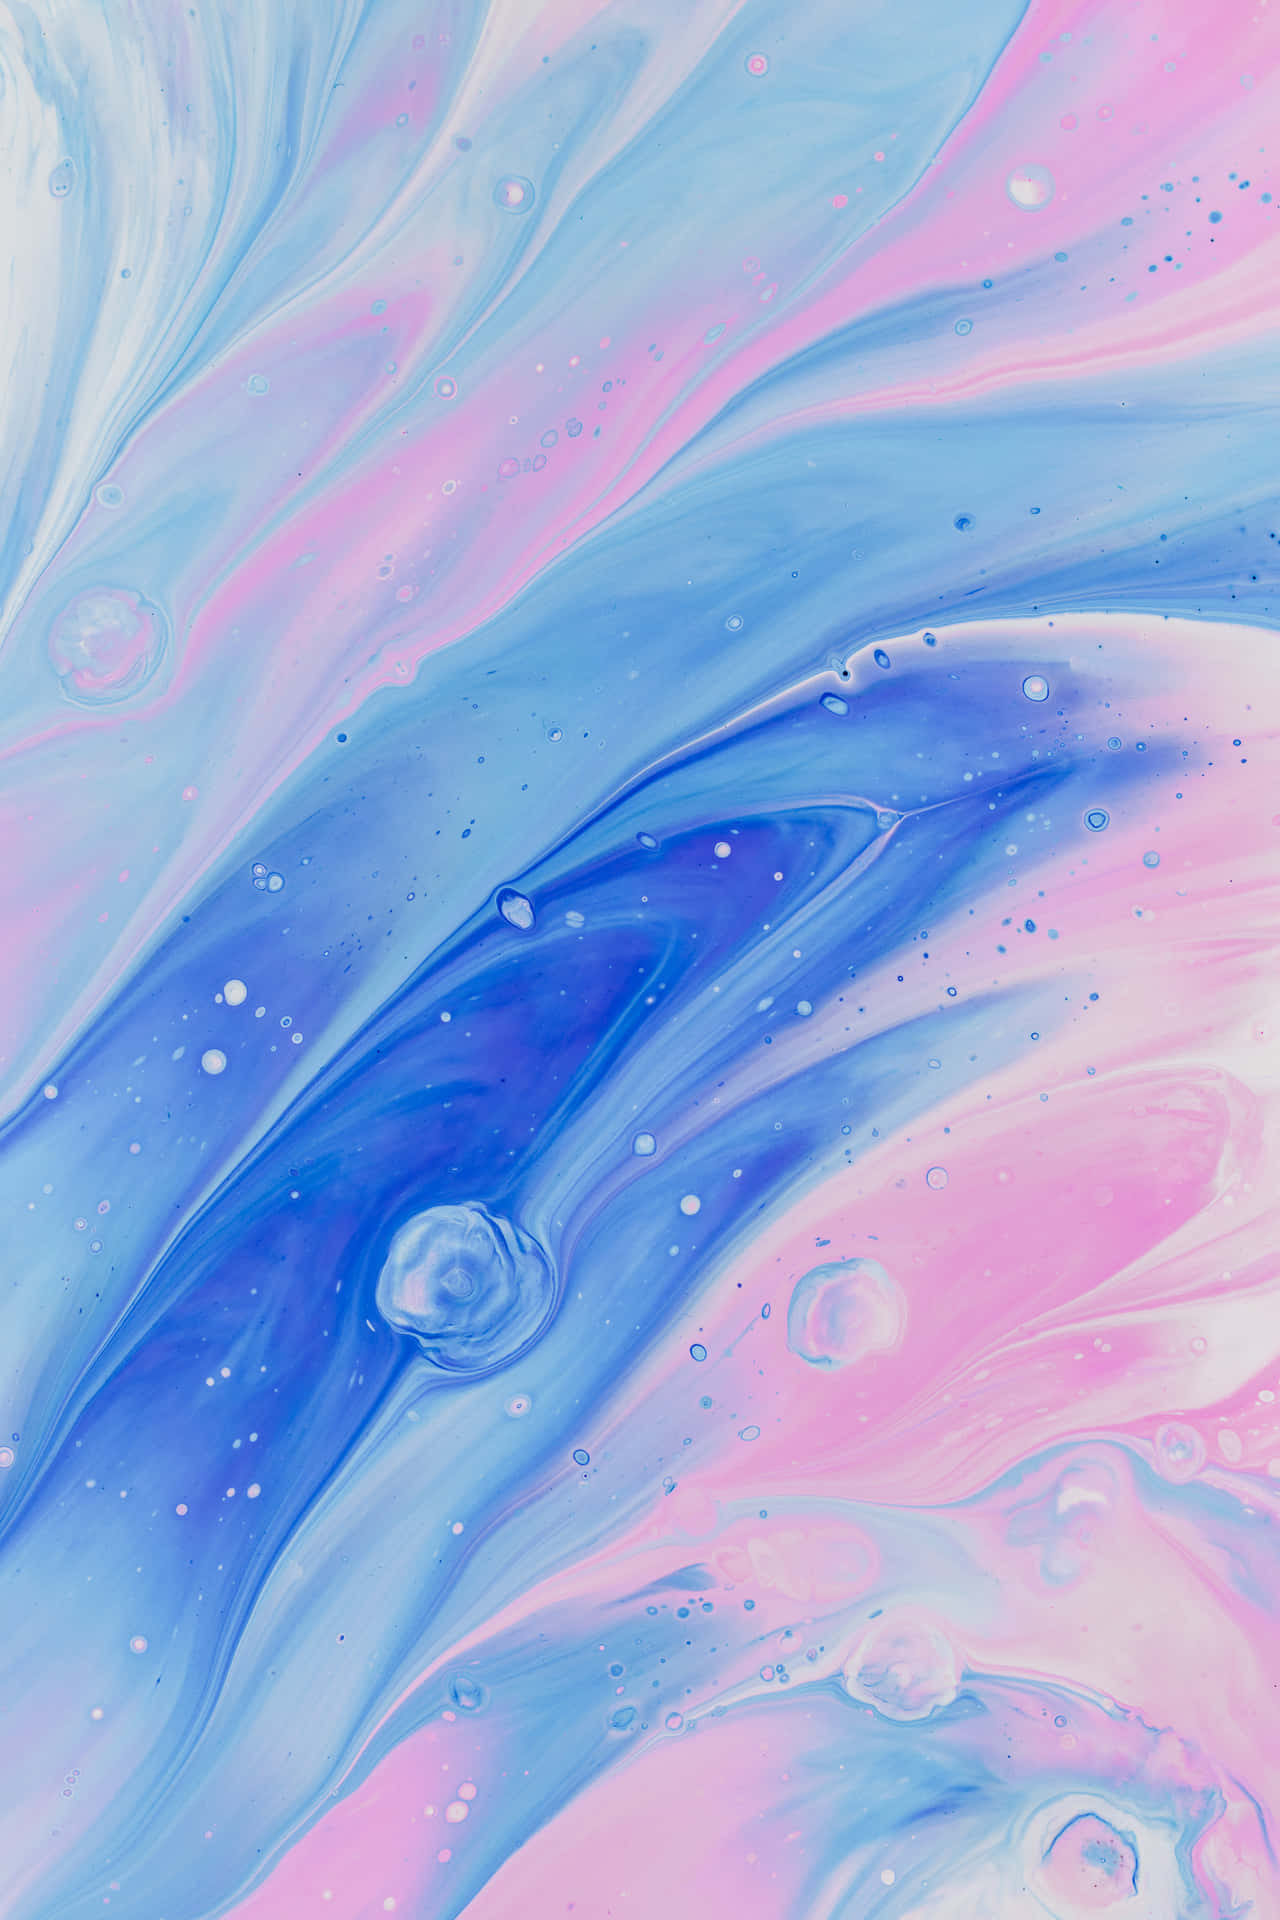 Blue And Pink Abstract Liquid Background